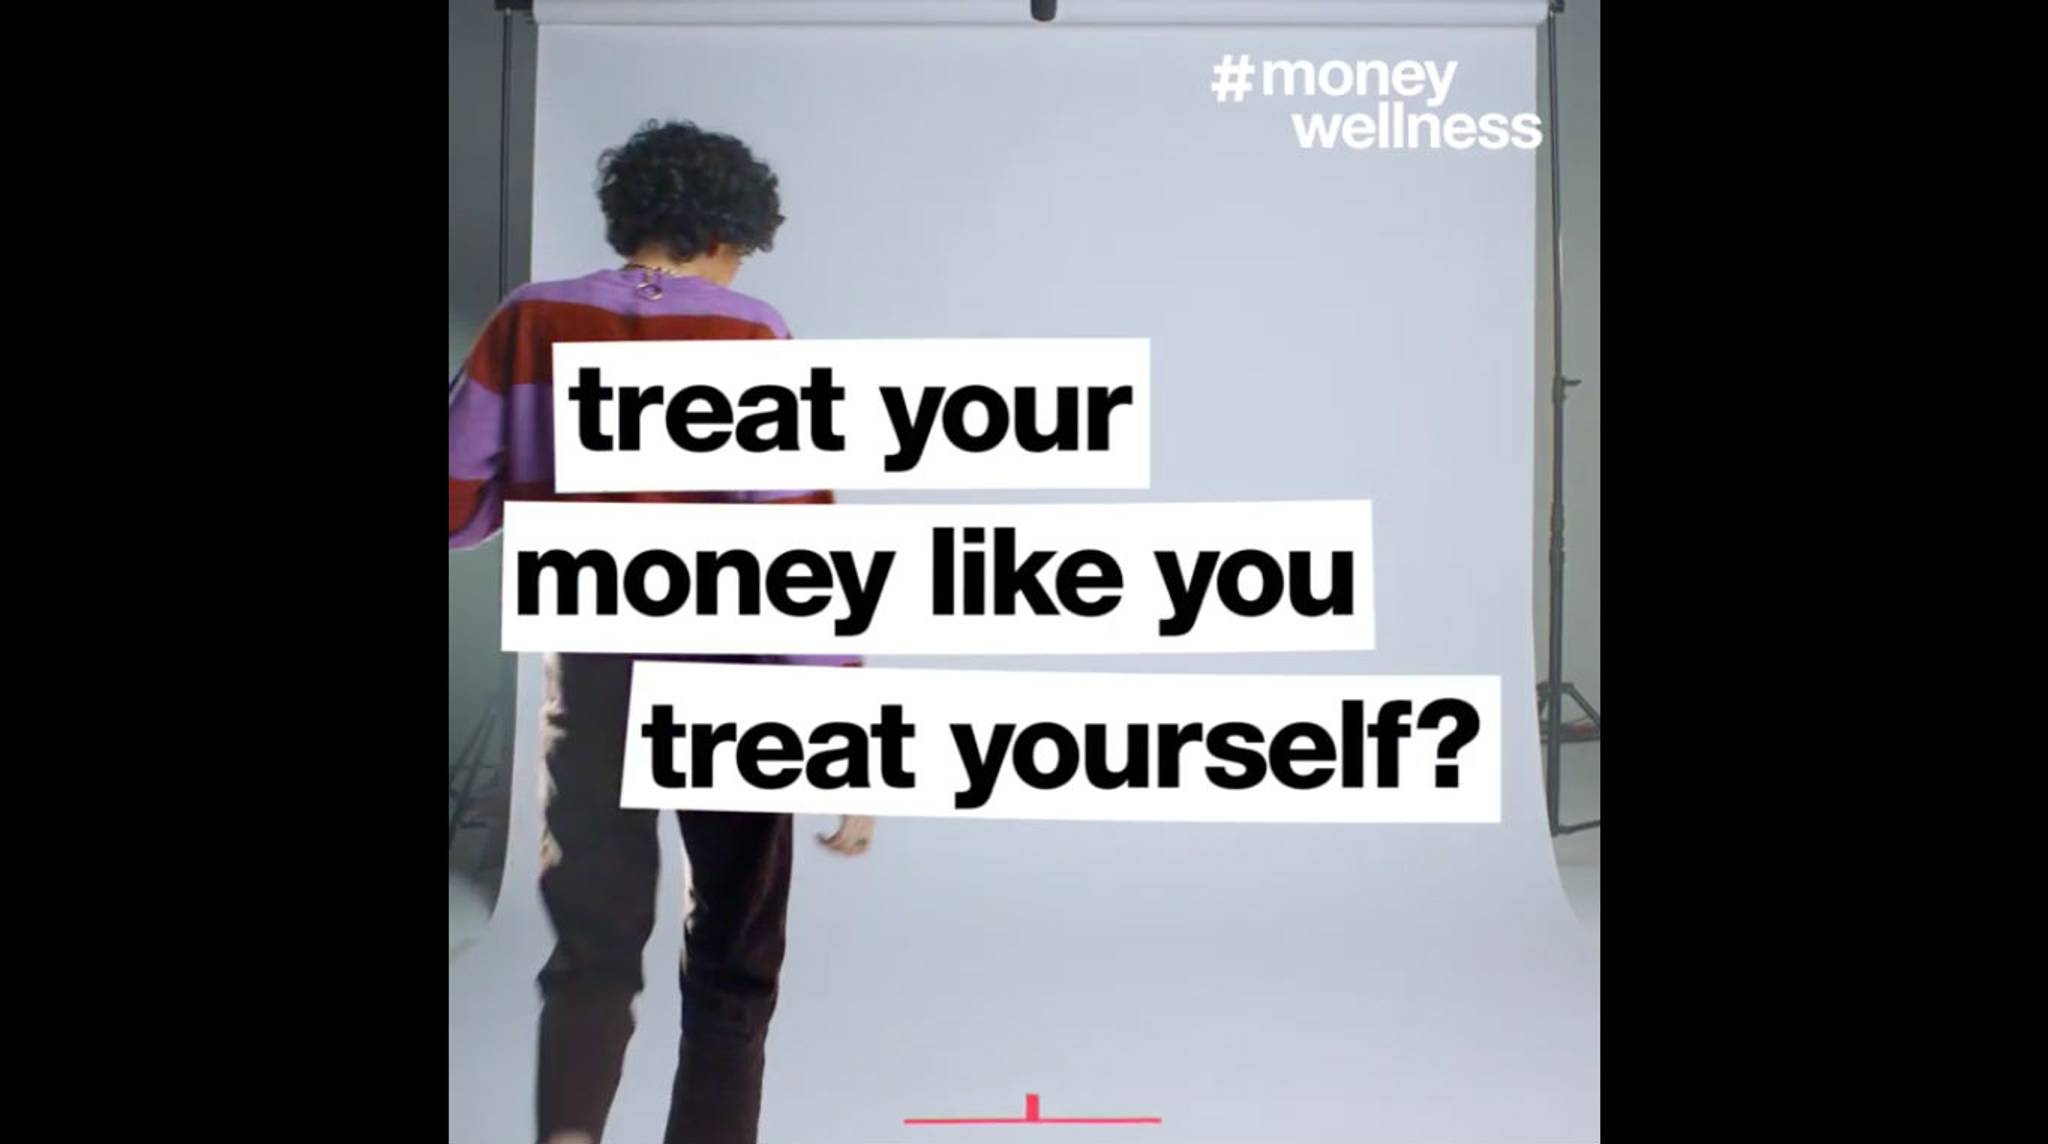 First Direct campaign aims to normalise money worries